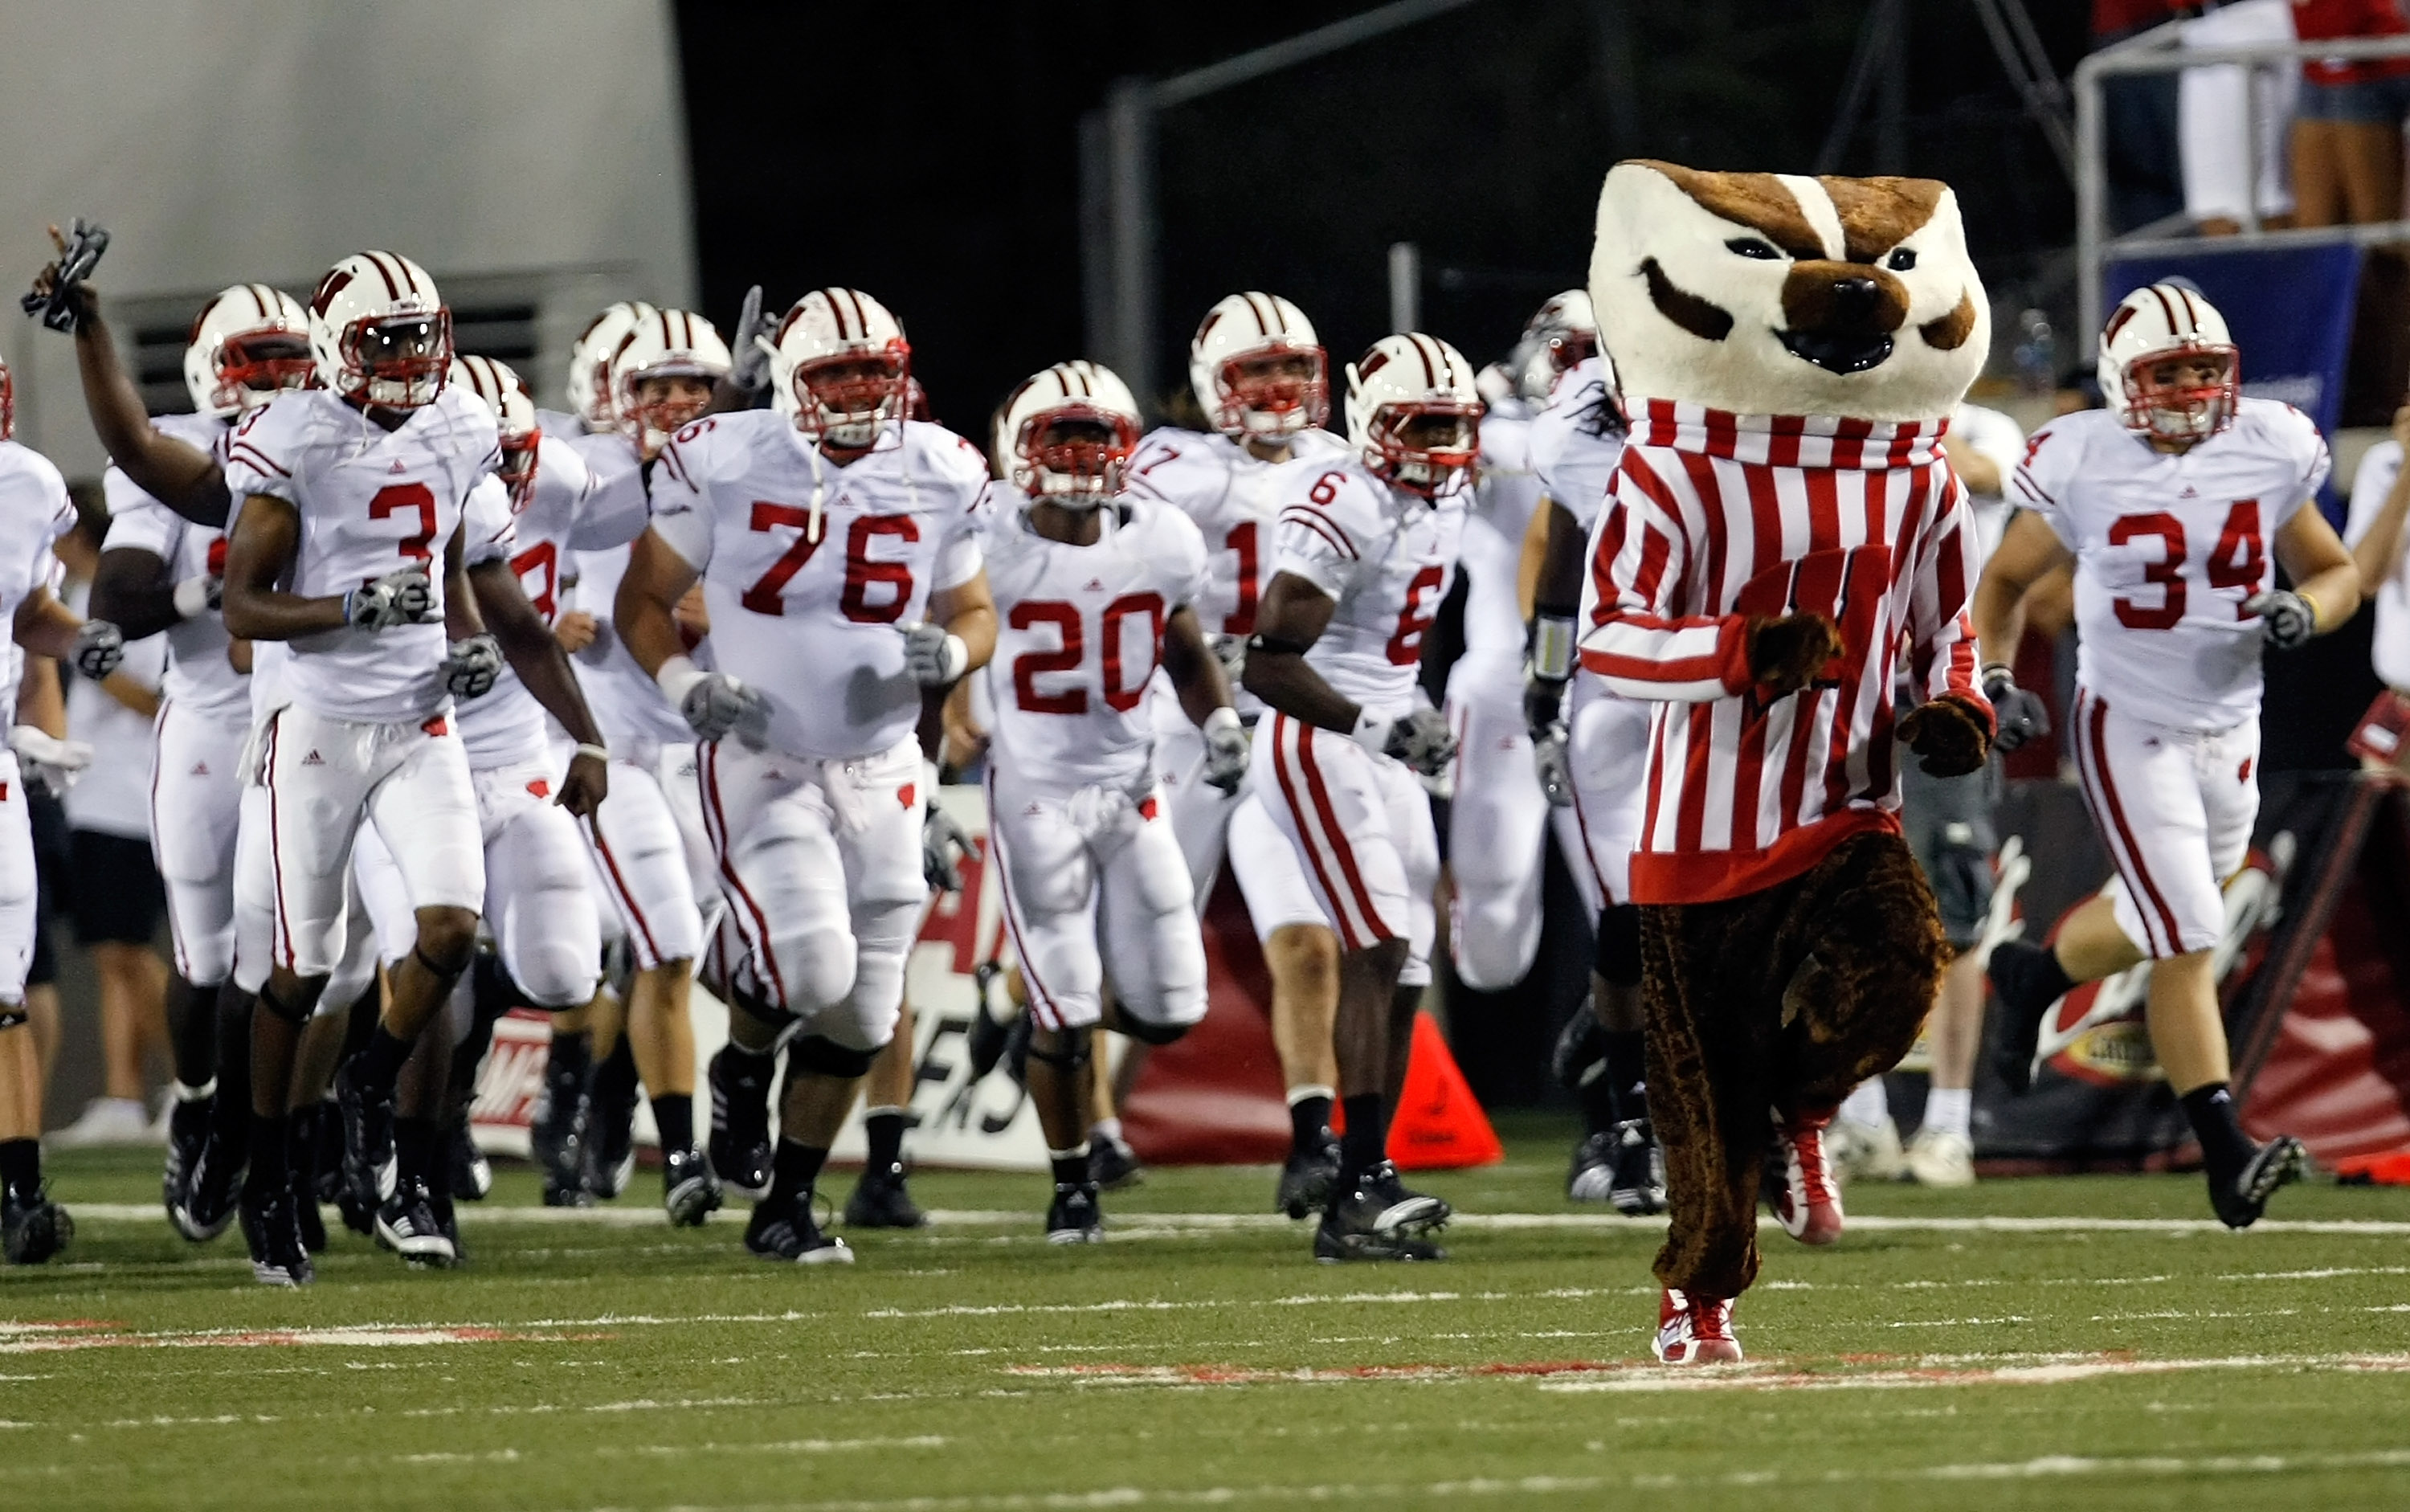 LAS VEGAS - SEPTEMBER 04:  The Wisconsin Badgers, including mascot Bucky Badger, take the field for their game against the UNLV Rebels at Sam Boyd Stadium September 4, 2010 in Las Vegas, Nevada. Wisconsin won 41-21.  (Photo by Ethan Miller/Getty Images)